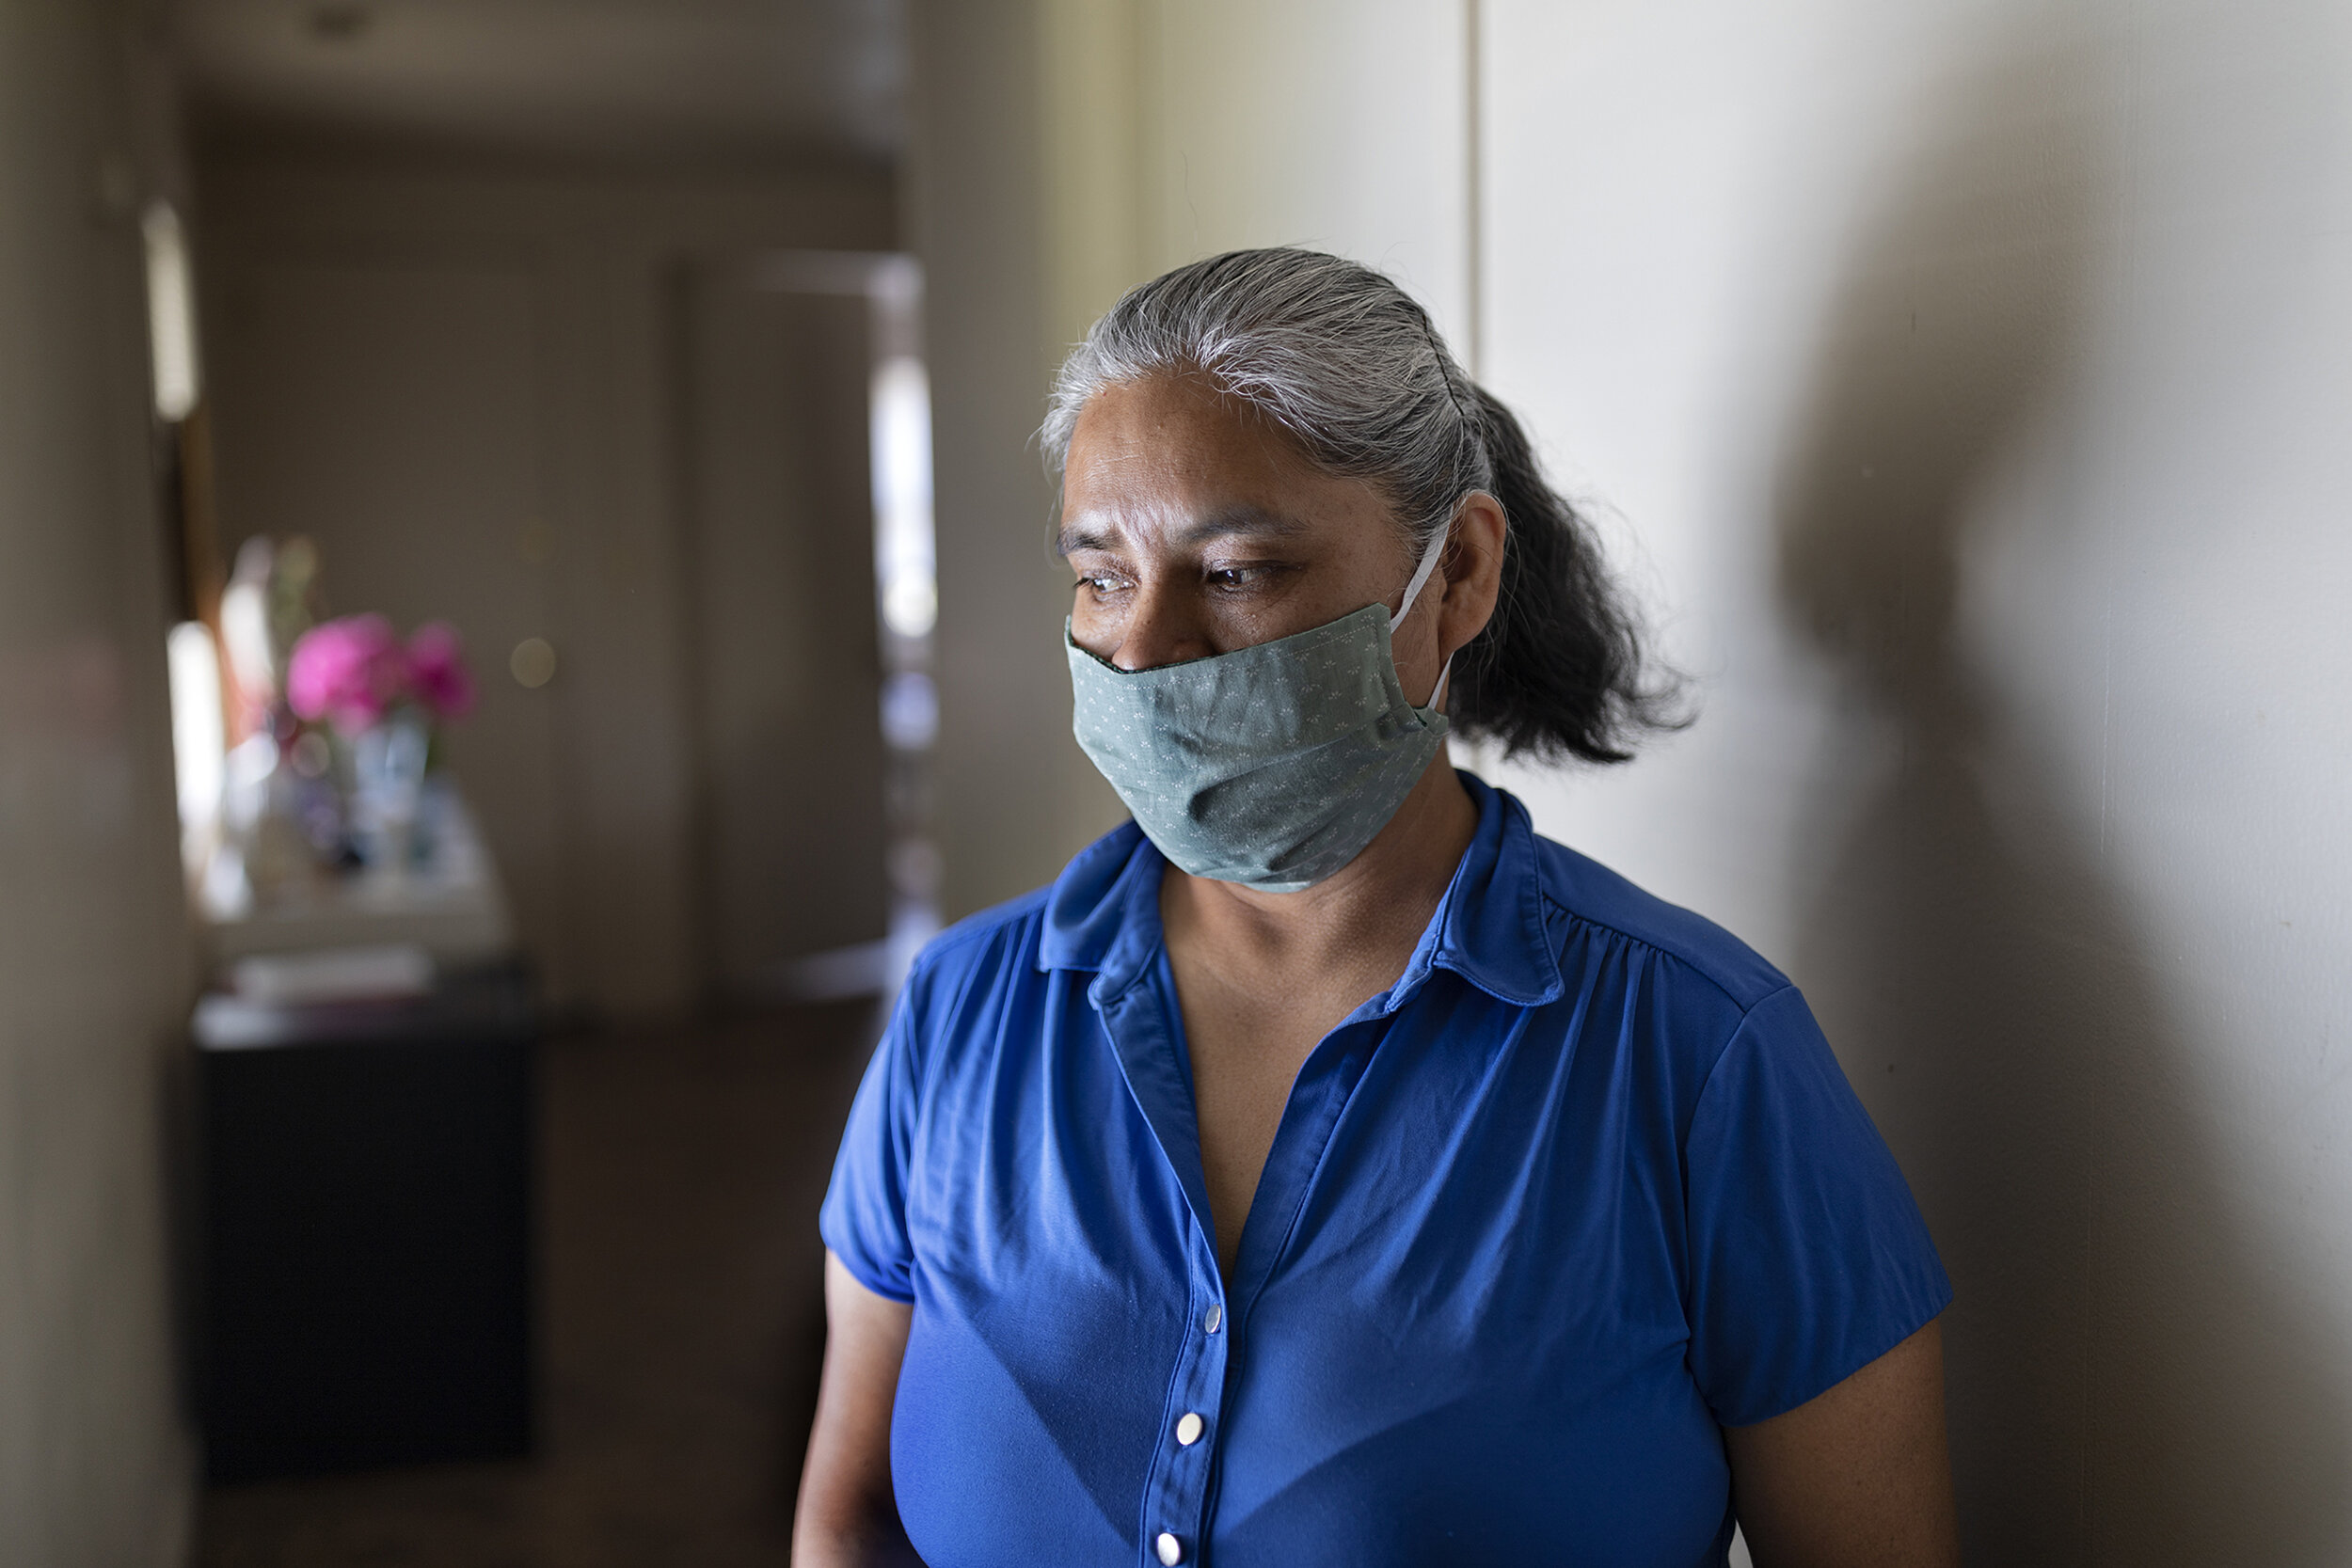  G.R., 52, a domestic worker, left Puebla, Mexico, in 1992 and entered the United States through California. She came directly to Freehold to join her father, who was already here, working as a day laborer. Since 2010, she has worked cleaning homes, 